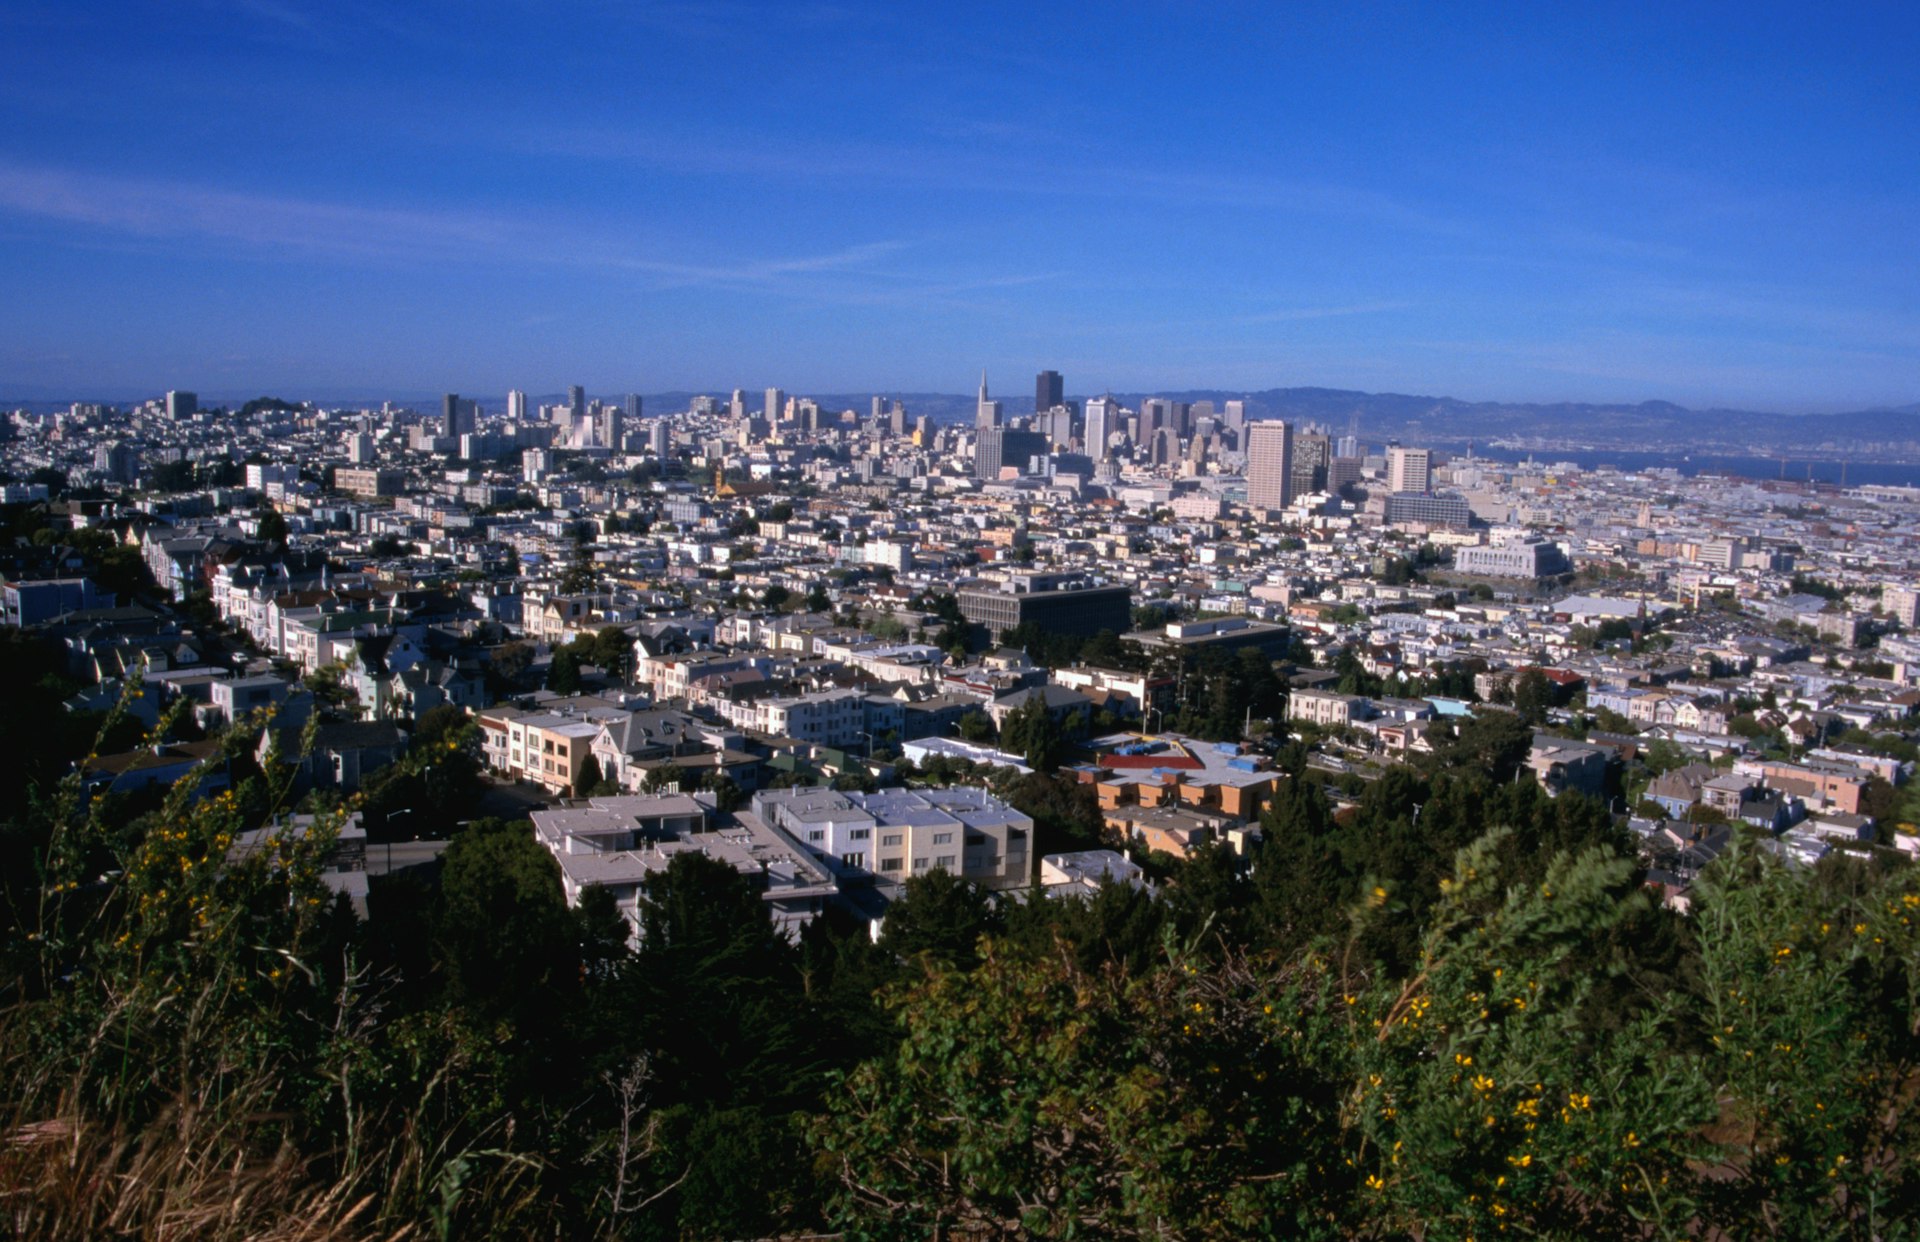 The city of San Francisco, as seen from Corona Heights Park, The Castro